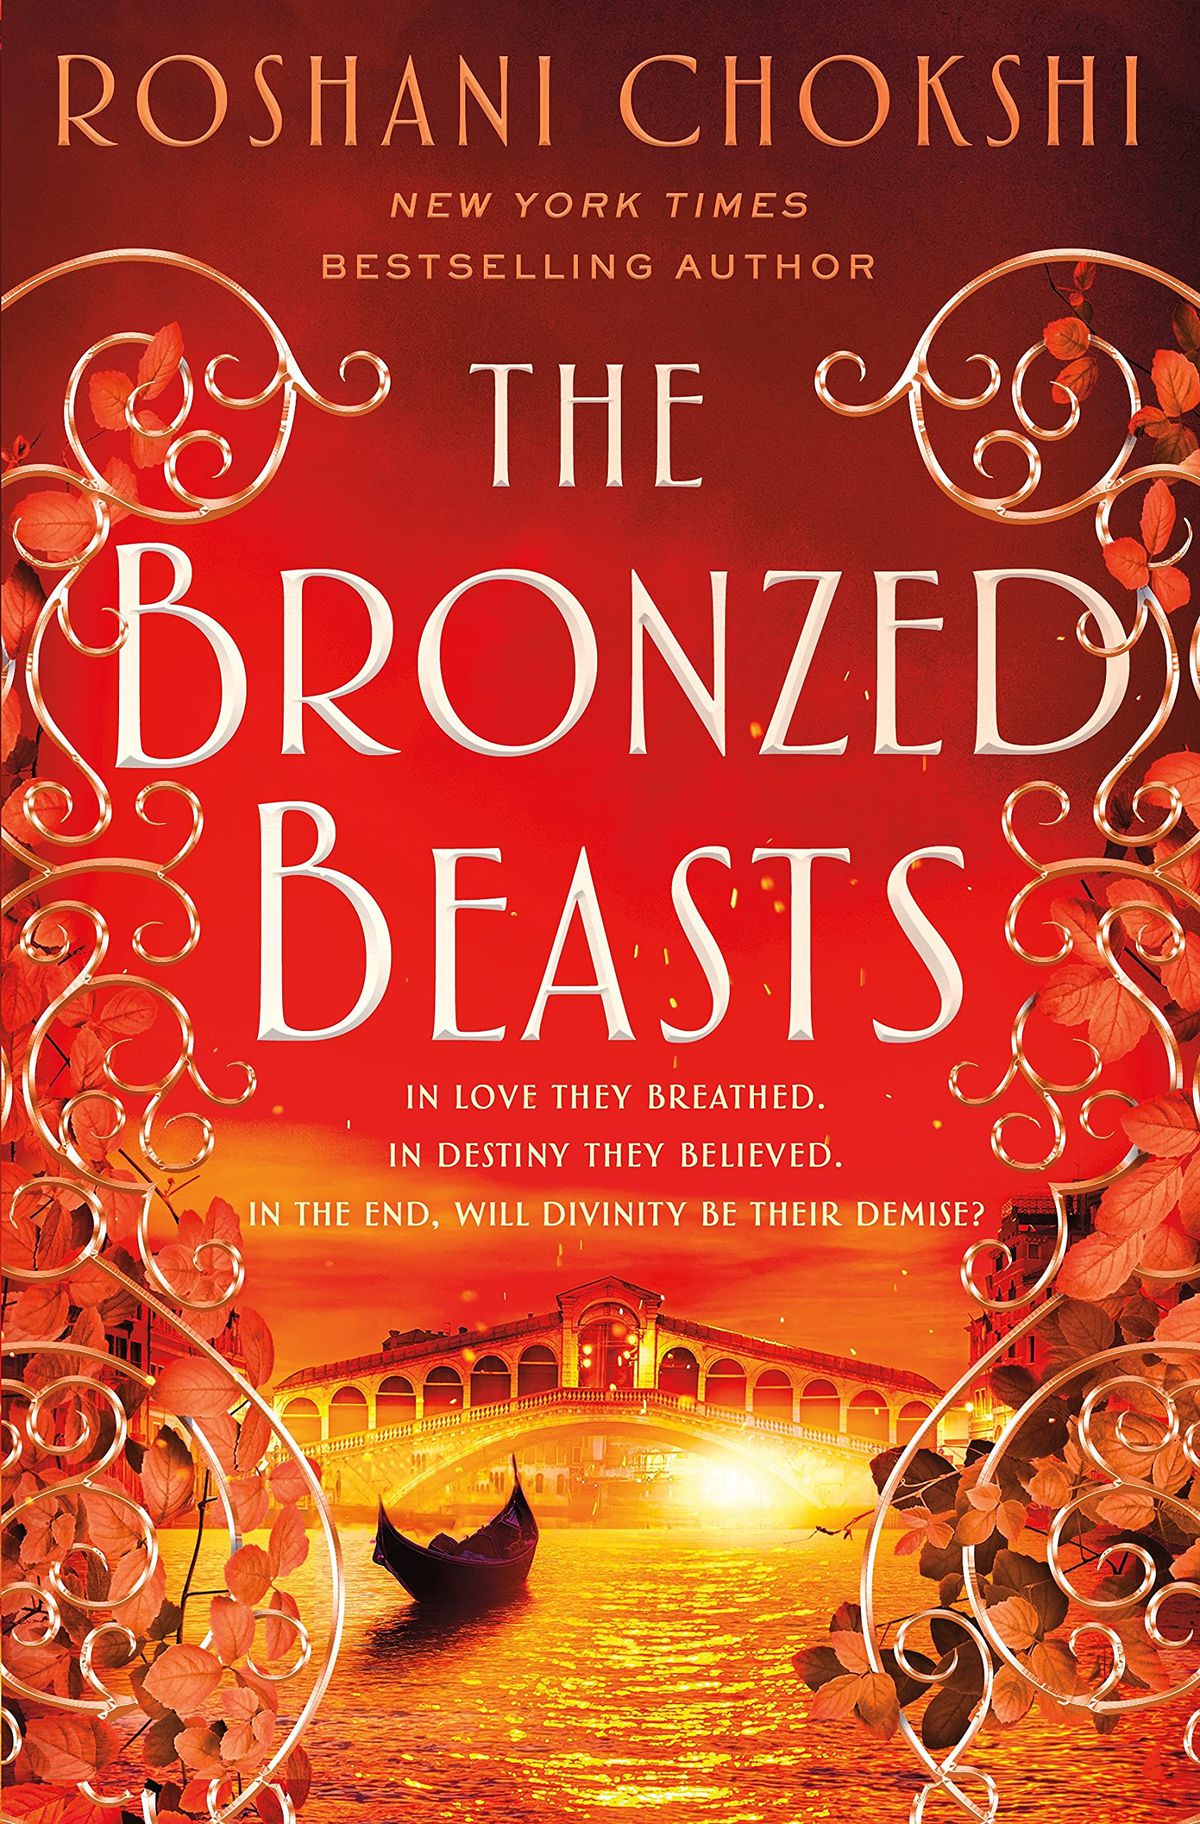 The cover for Roshani Chokshi’s “The Bronzed Beasts” which shows a boat approaching an arch.